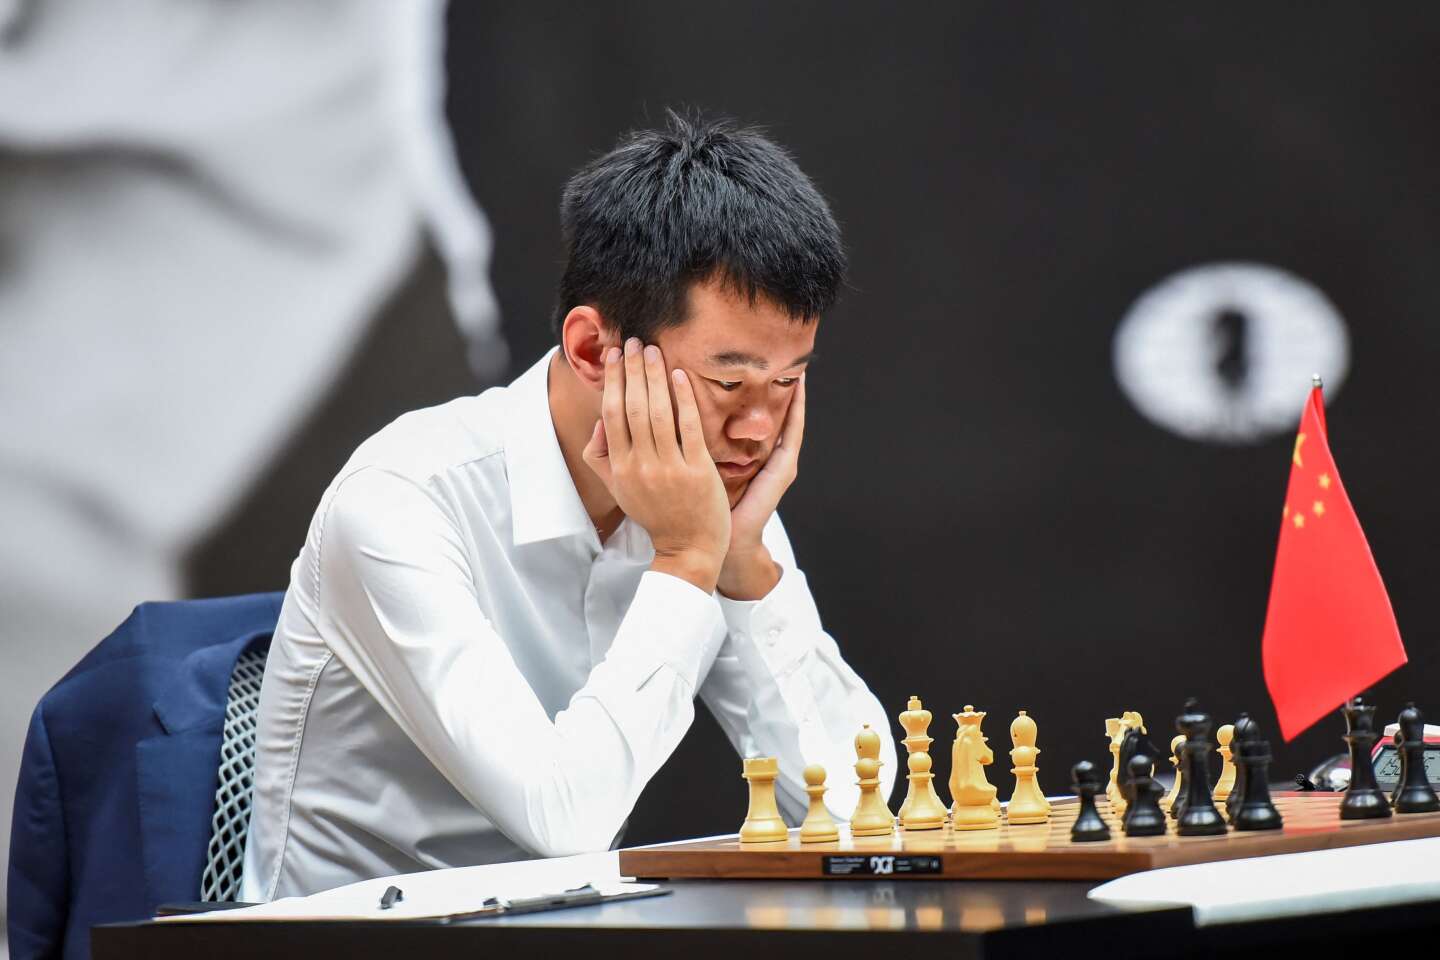 Ding Liren is the new world chess champion